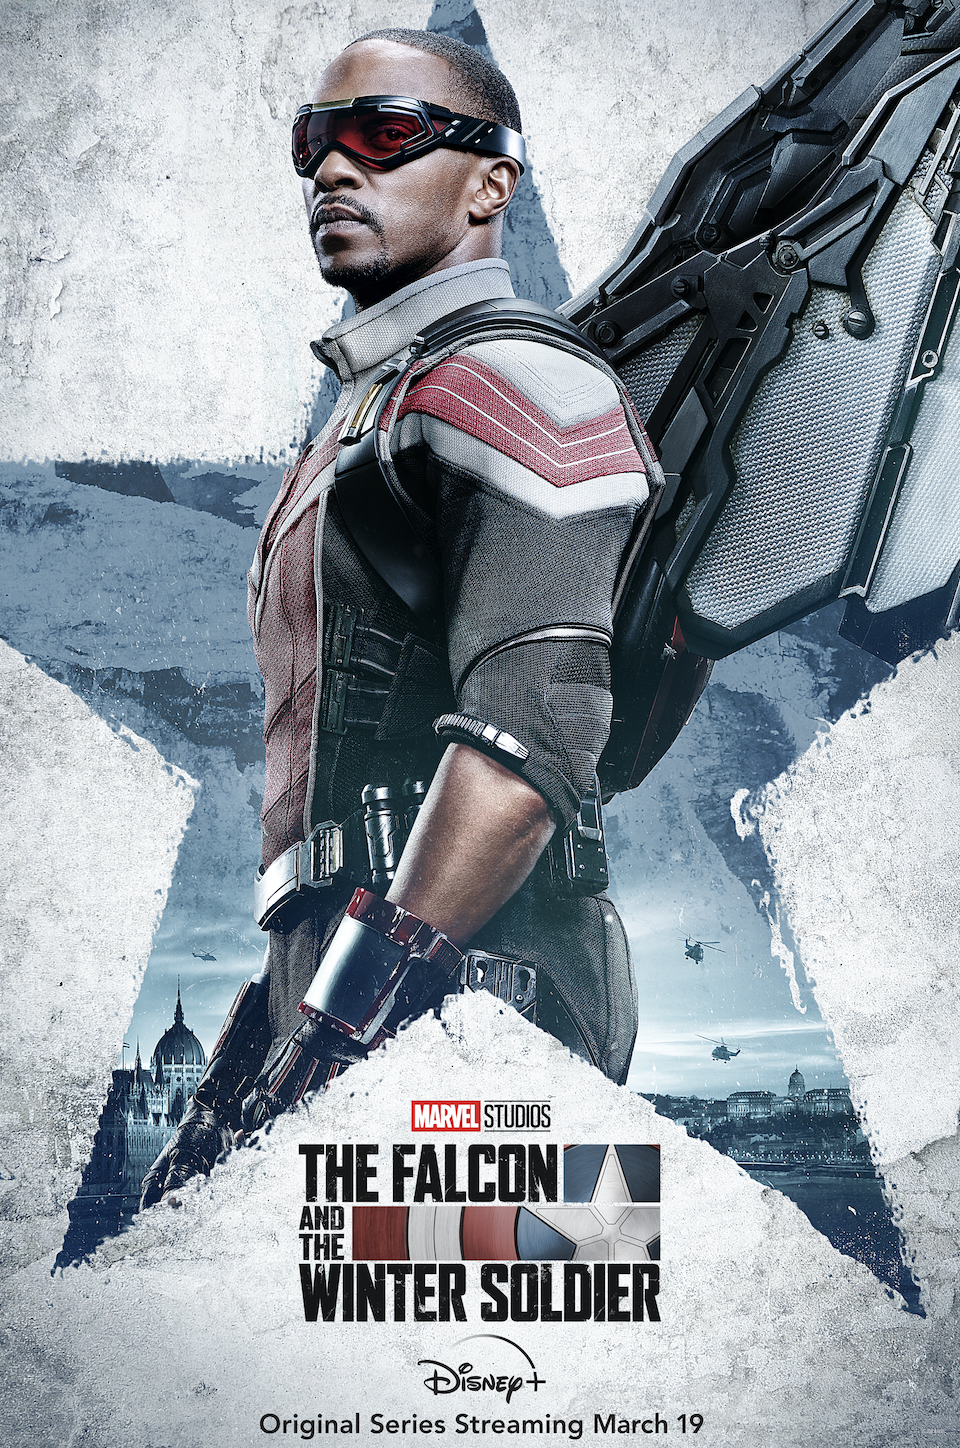 PHOTOS: New Posters Revealed for Marvel's 'Falcon and the Winter Solder'!